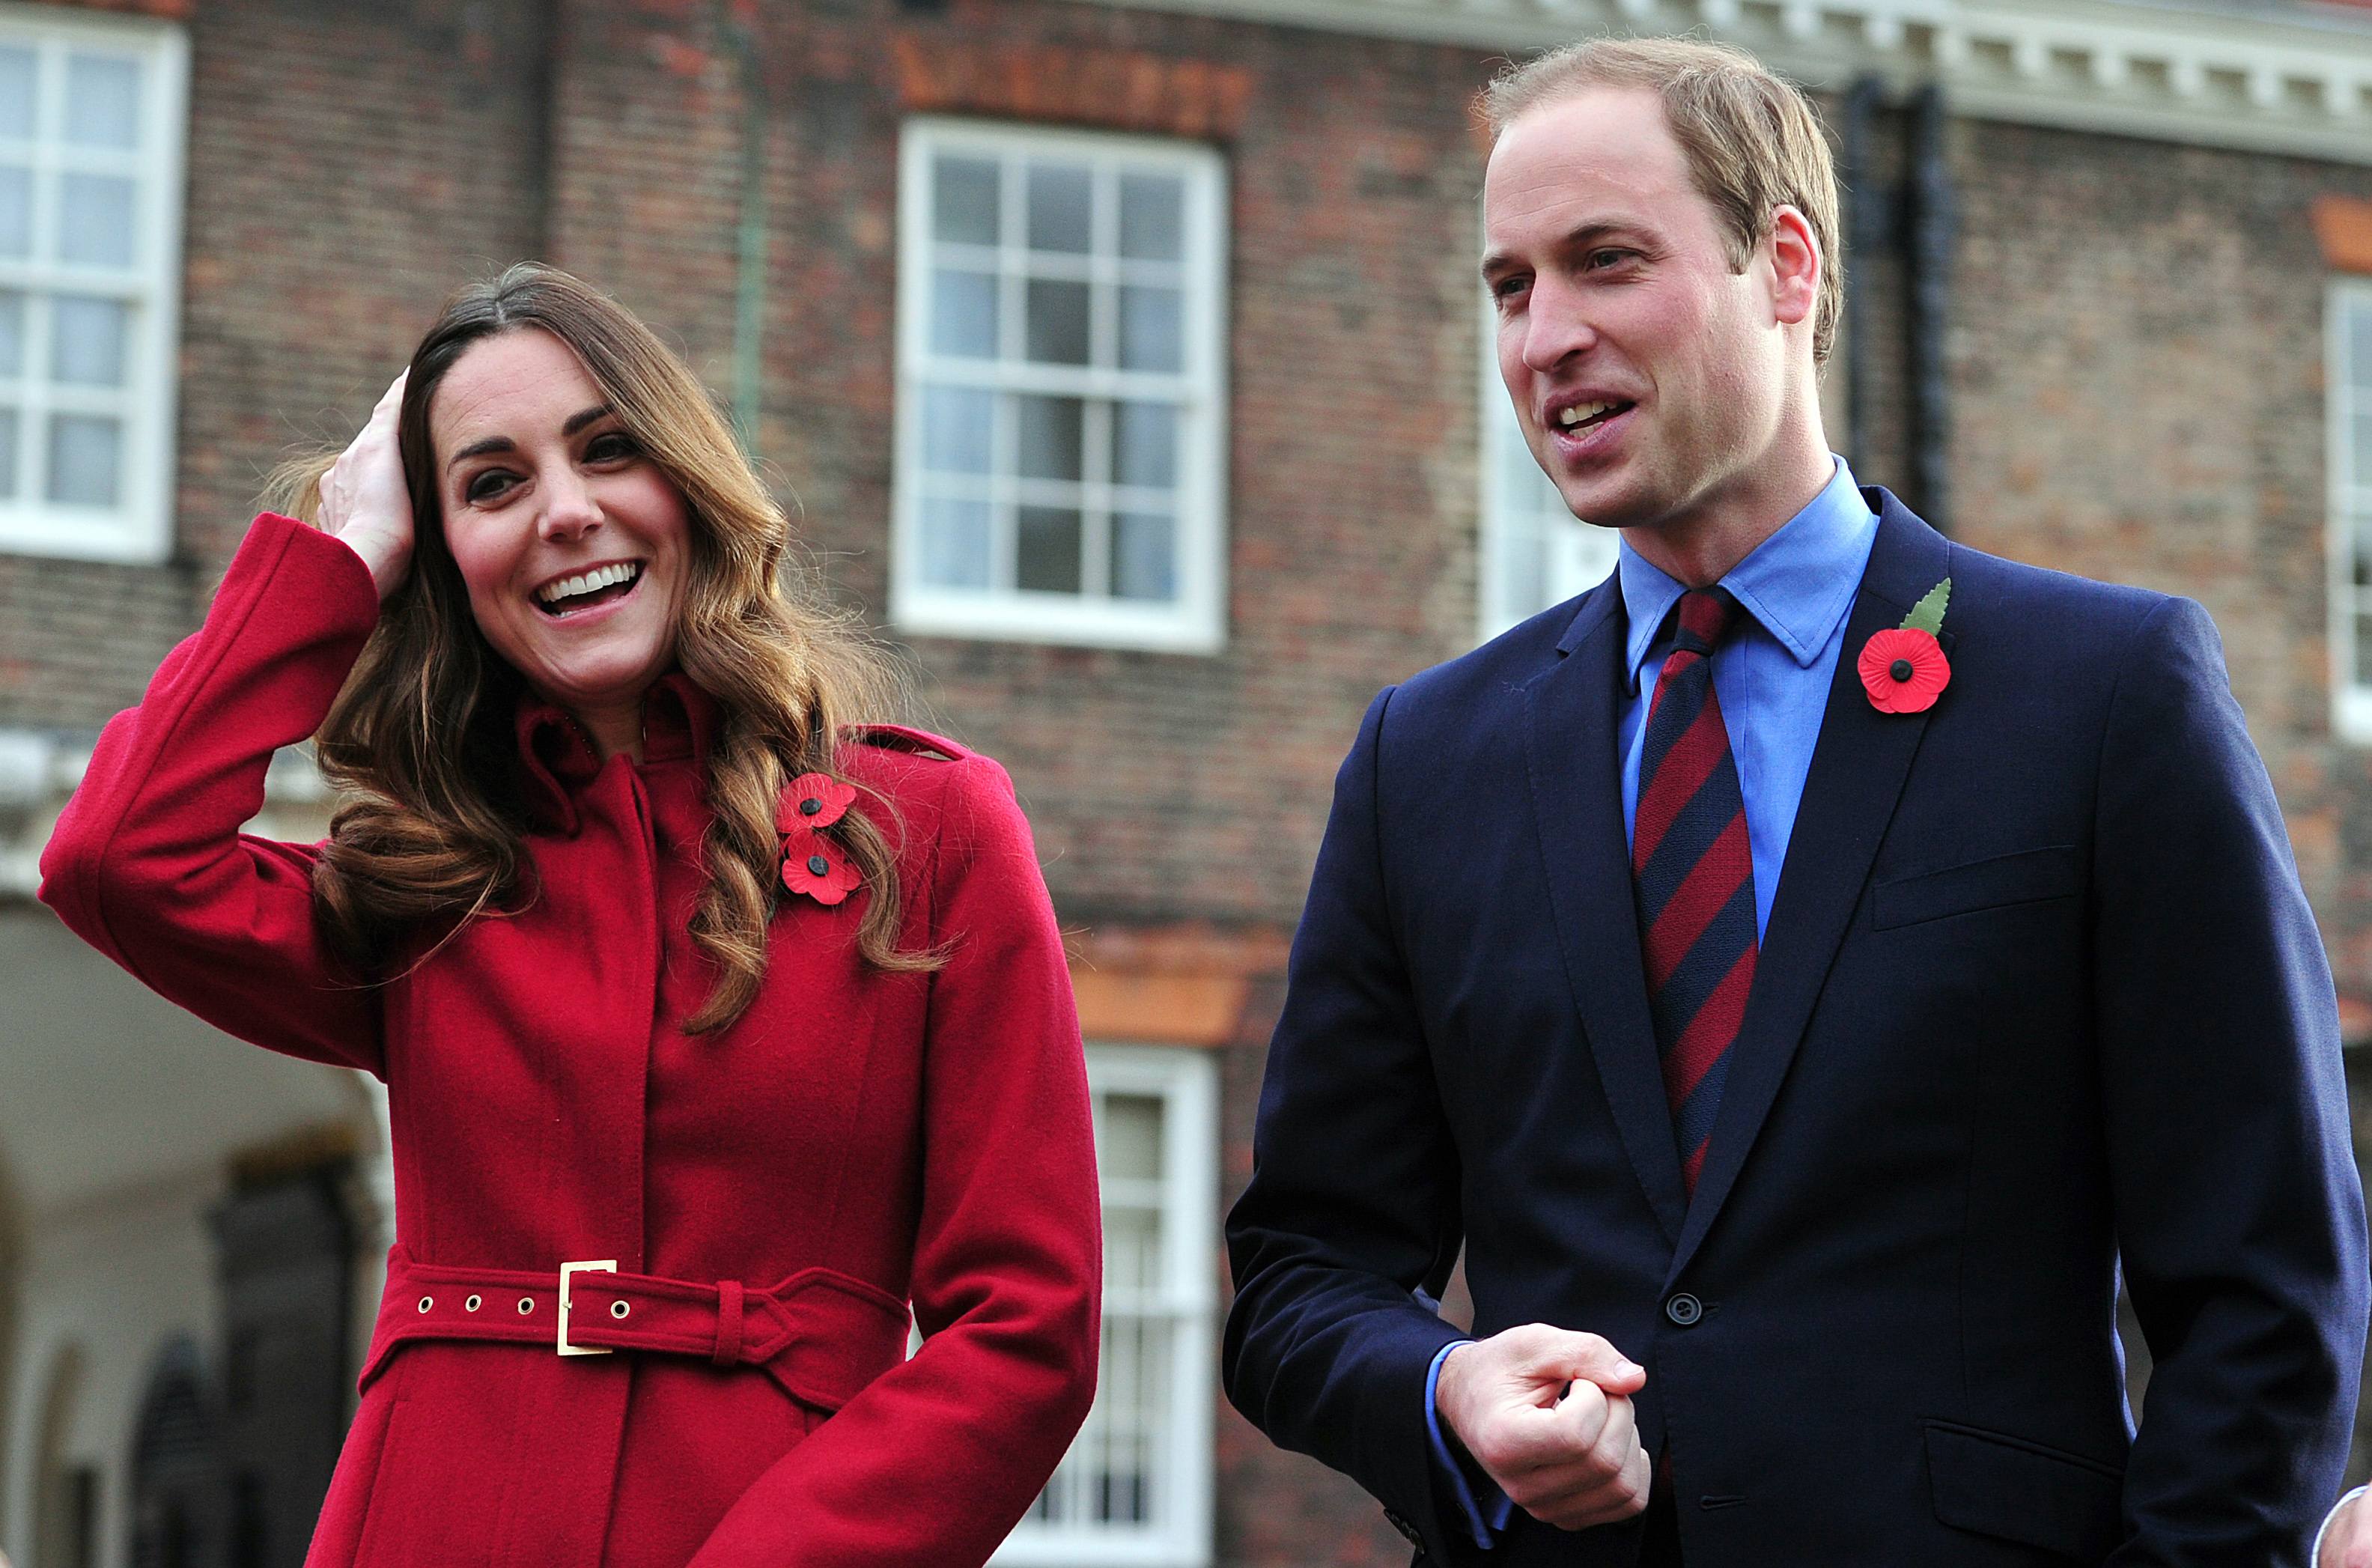 Britain's Prince William and his wife Catherine, Duchess of Cambridge, arrive to meet volunteers and workers during a Royal British Legion Poppy Day event at Kensington Palace in London